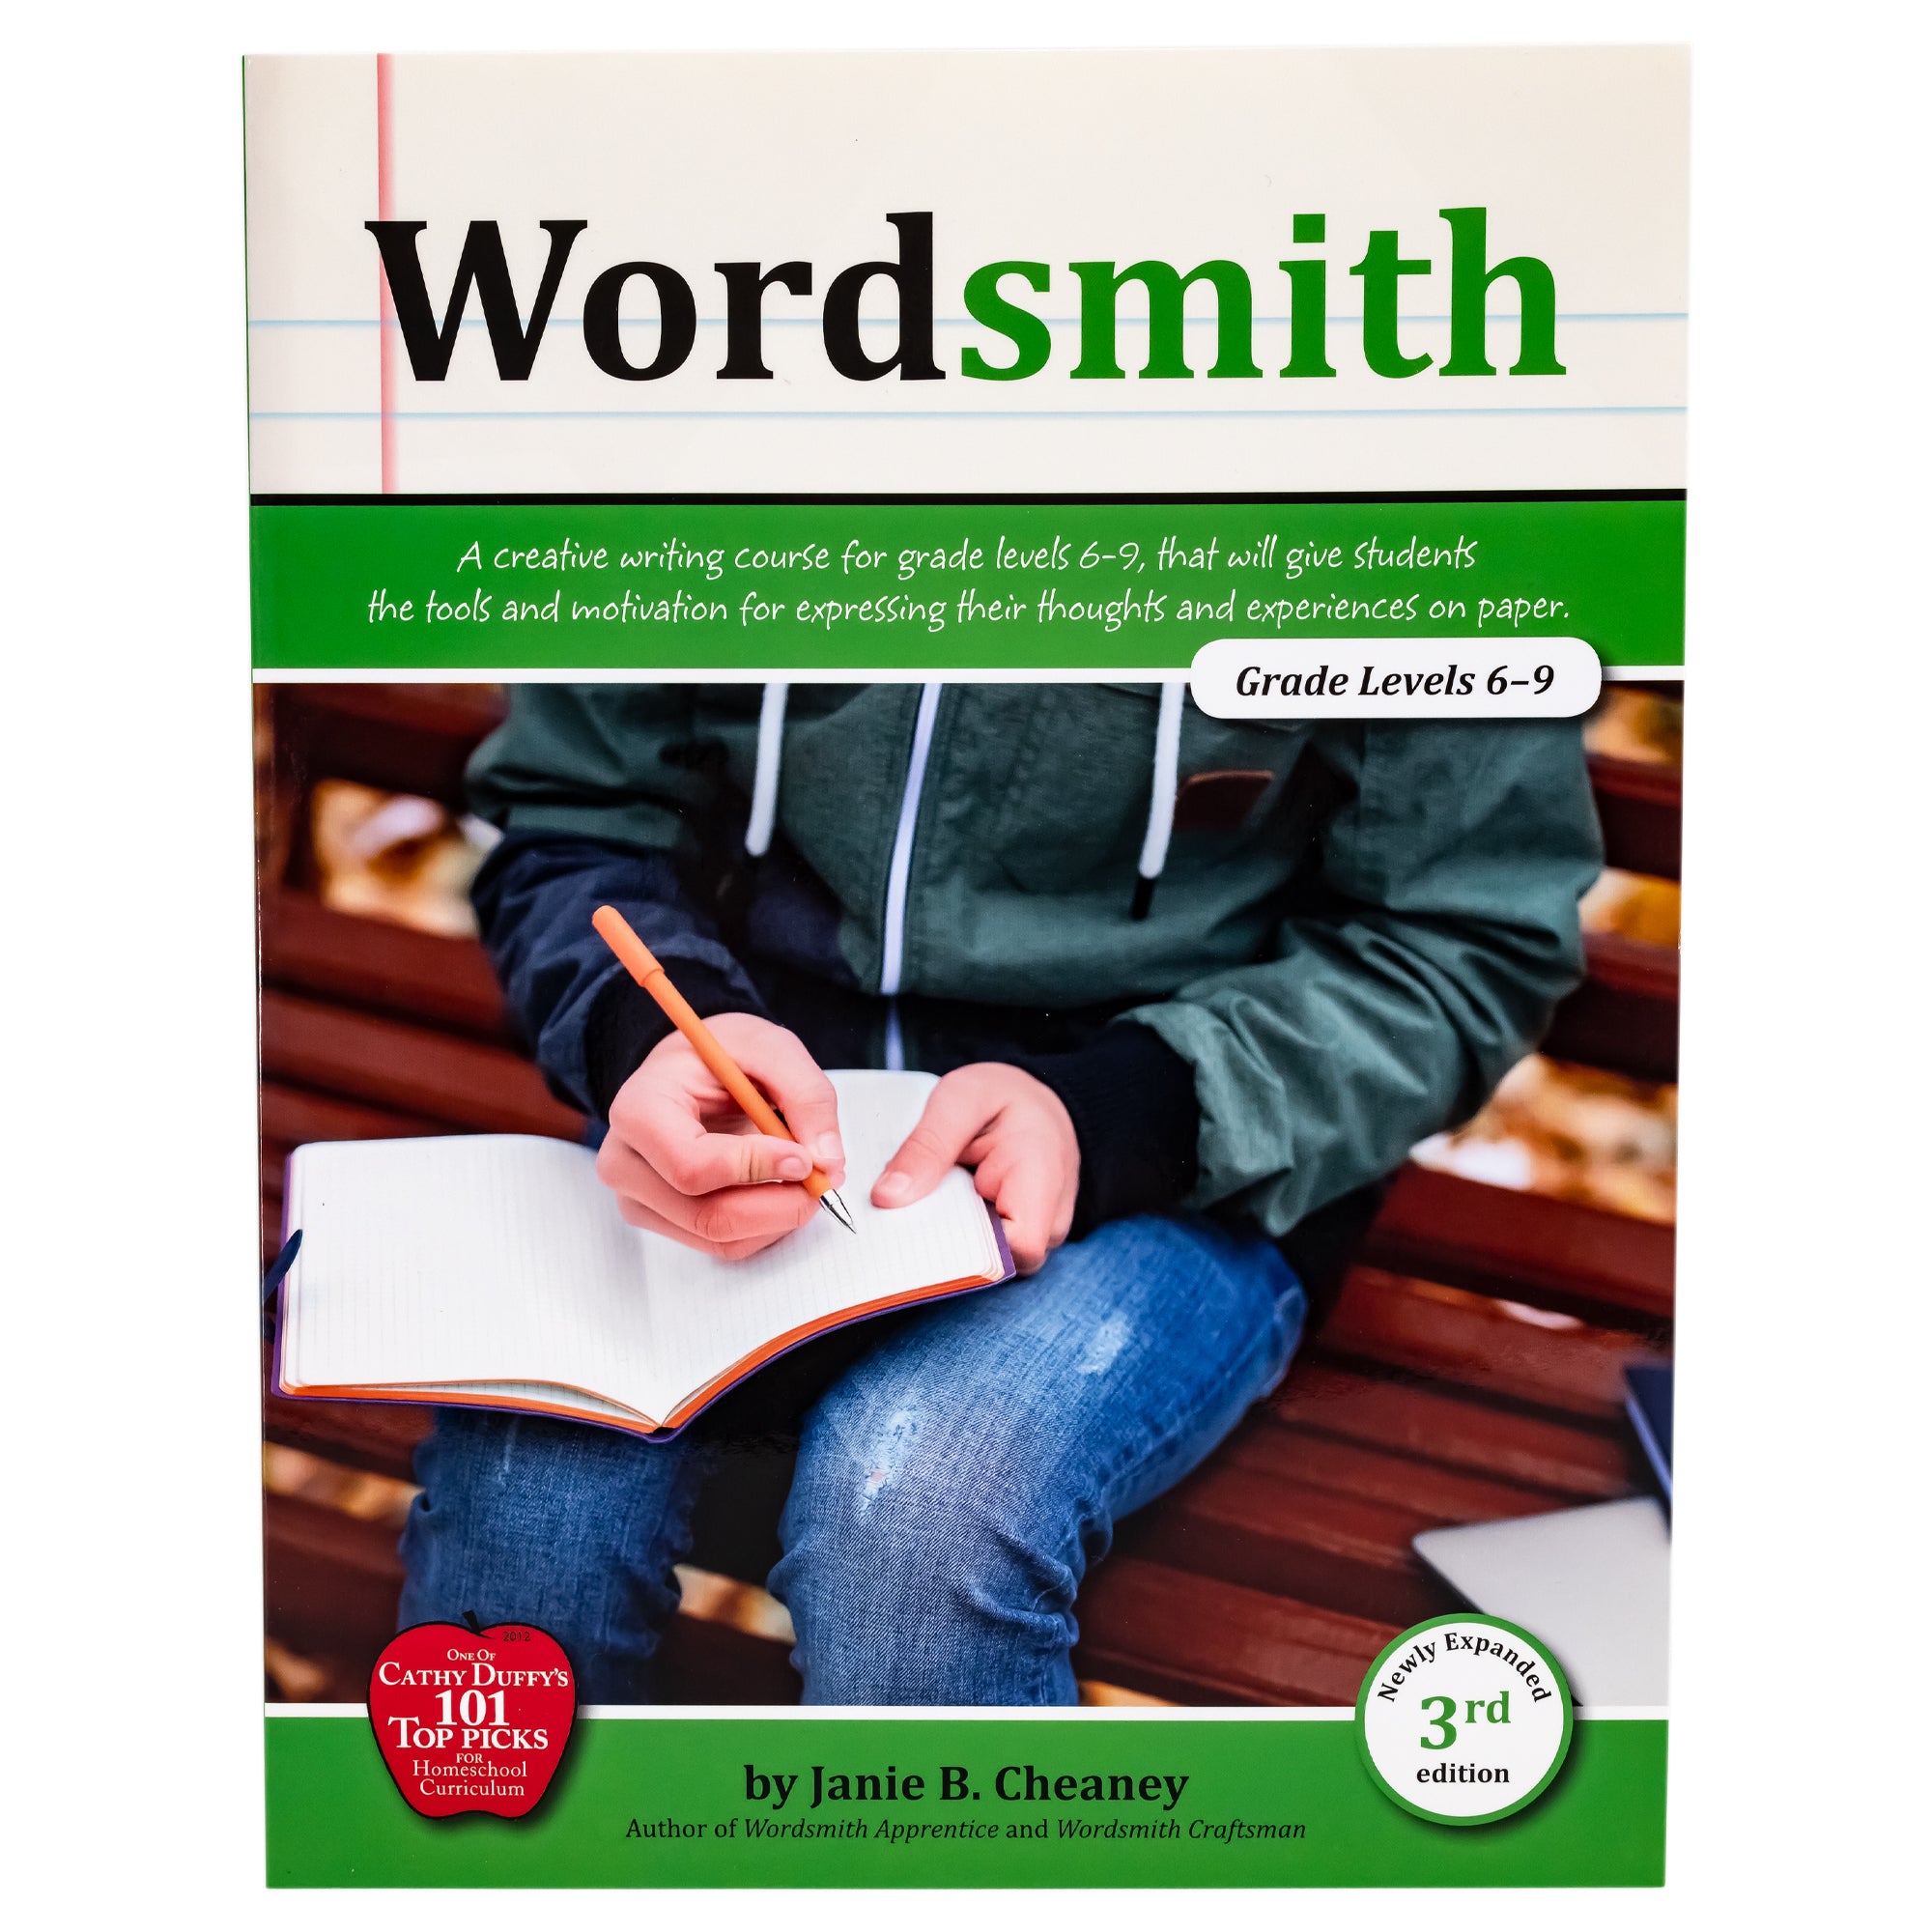 Wordsmith cover. The background shows notebook paper at the top and 2 green bands under. Between the green bands is a picture of a boy writing in a journal.